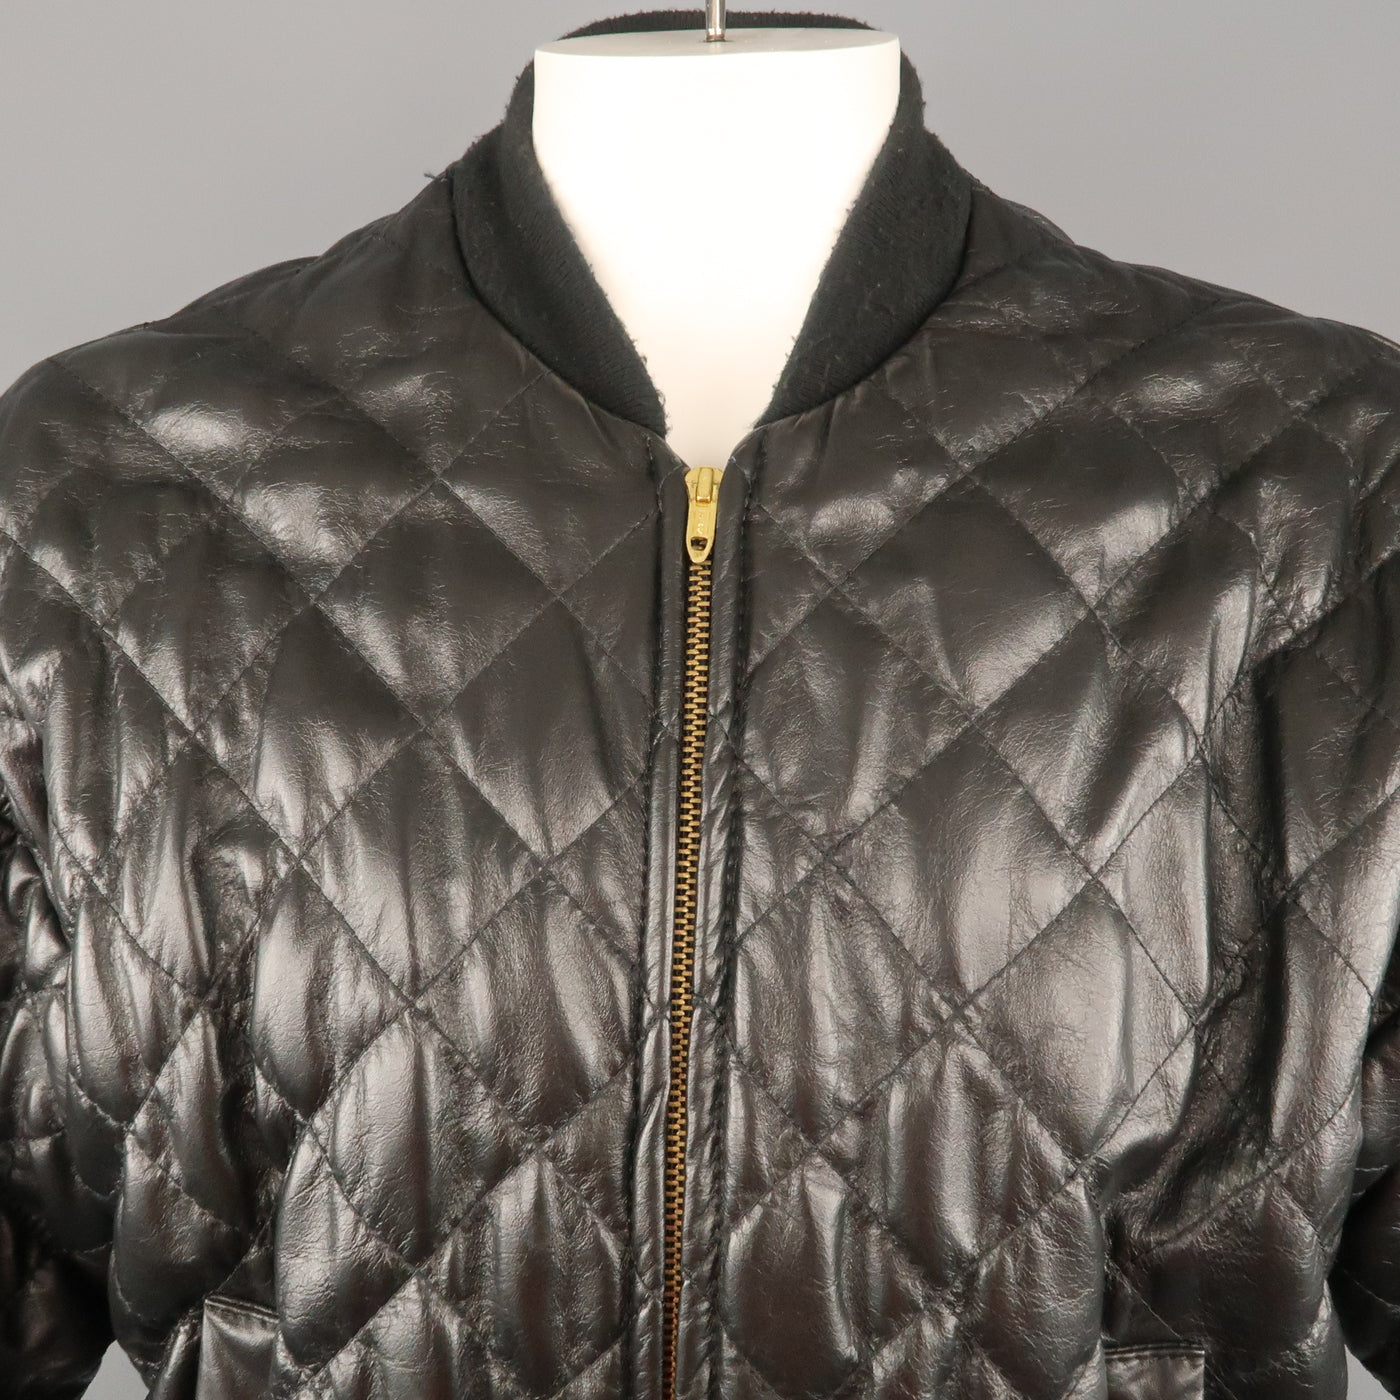 TROY ANICETE 42 Black Quilted Leather Bomber Jacket